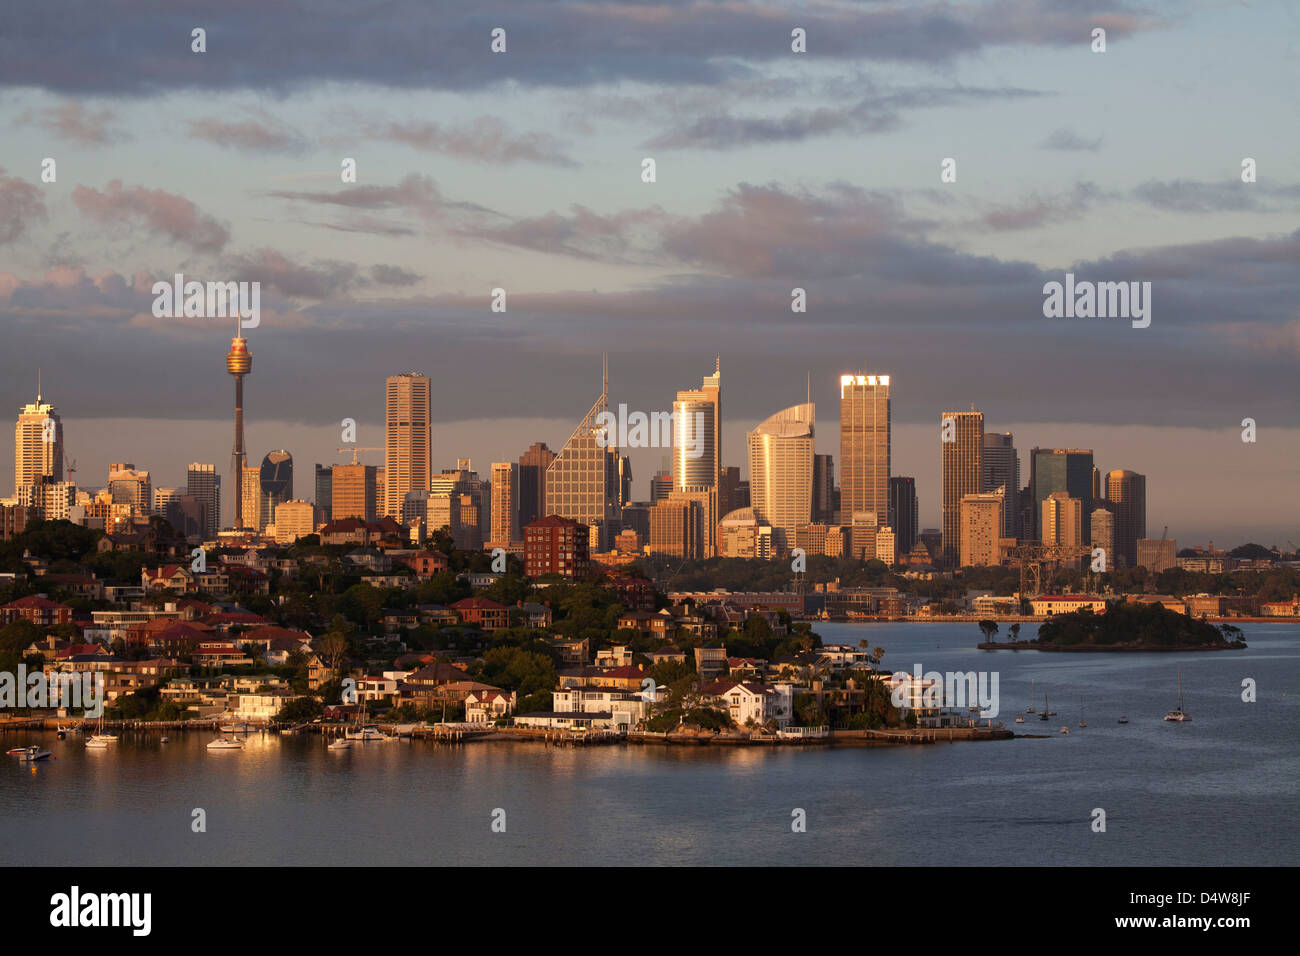 Early morning view of Sydney CBD Skyline with residential Point Piper and Rose Bay in foreground Sydney Australia Stock Photo